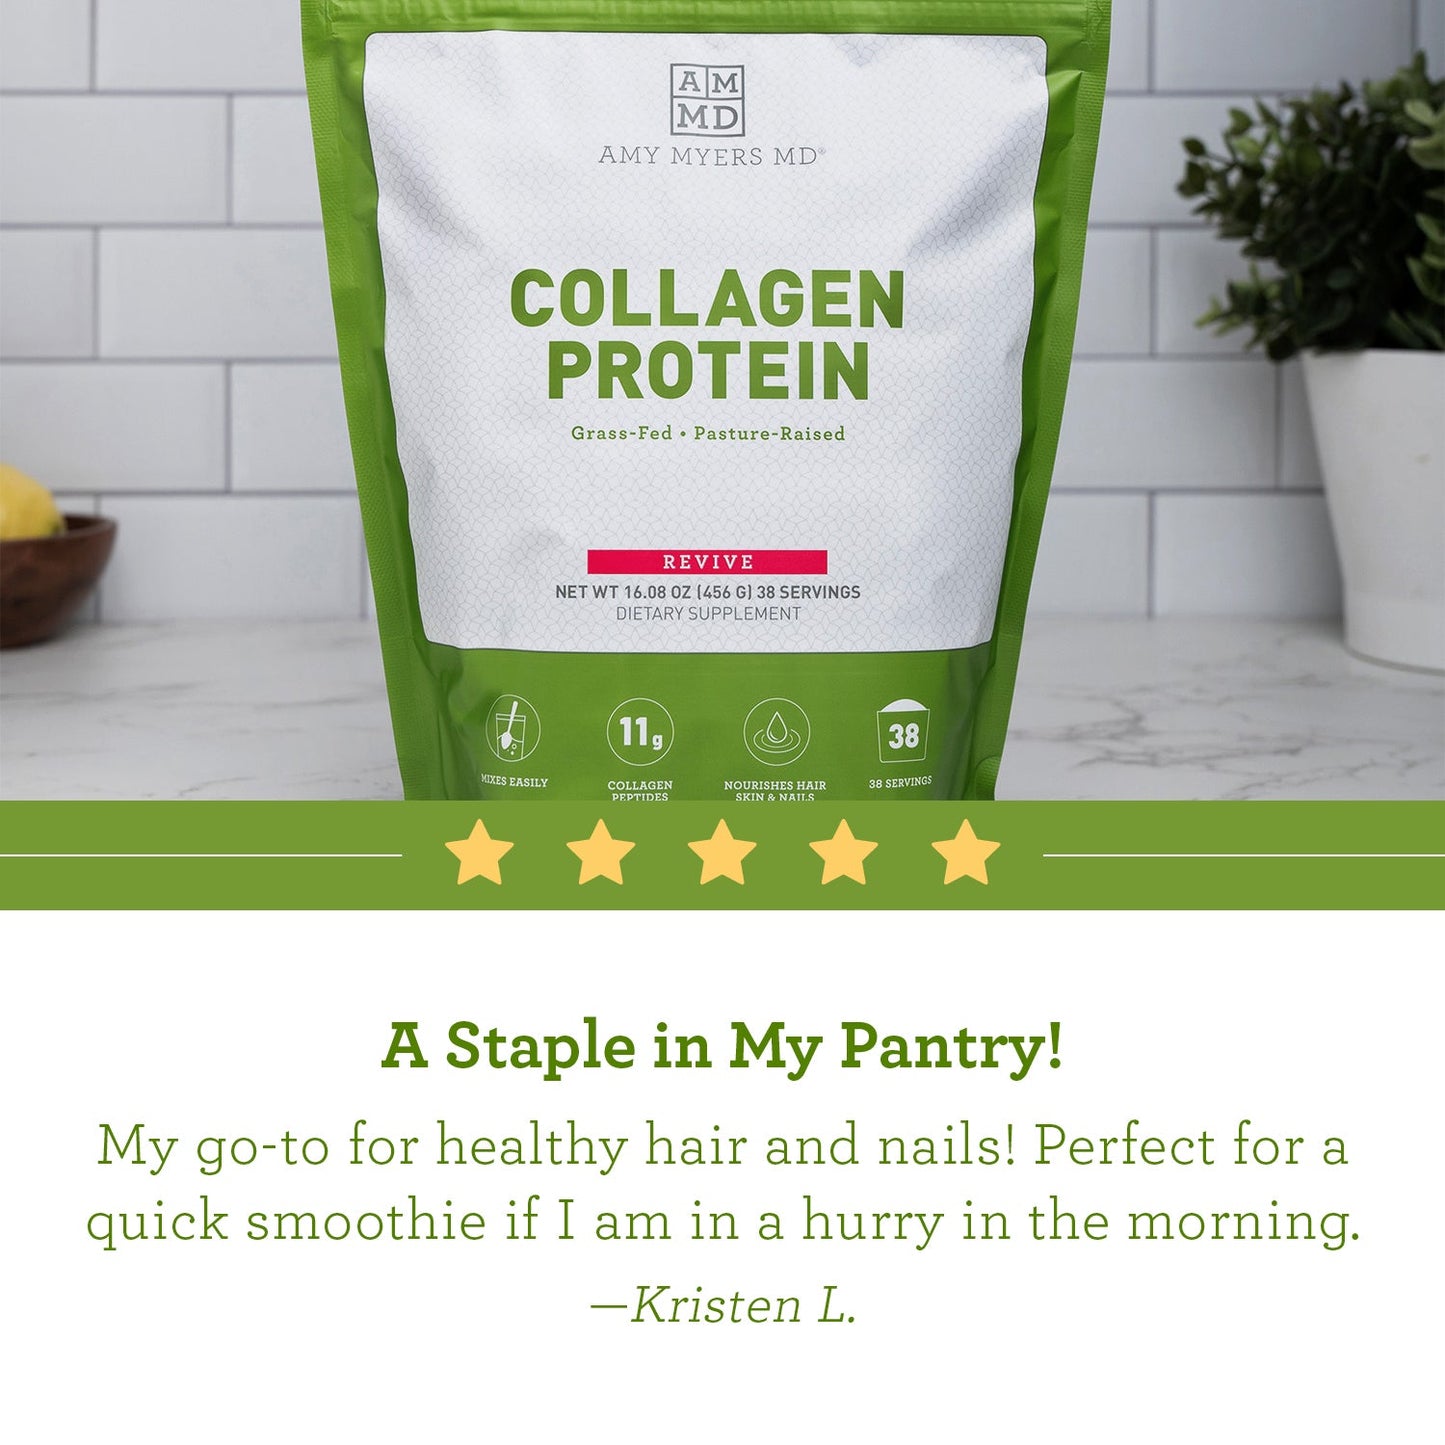 Collagen Protein by Amy Myers MD